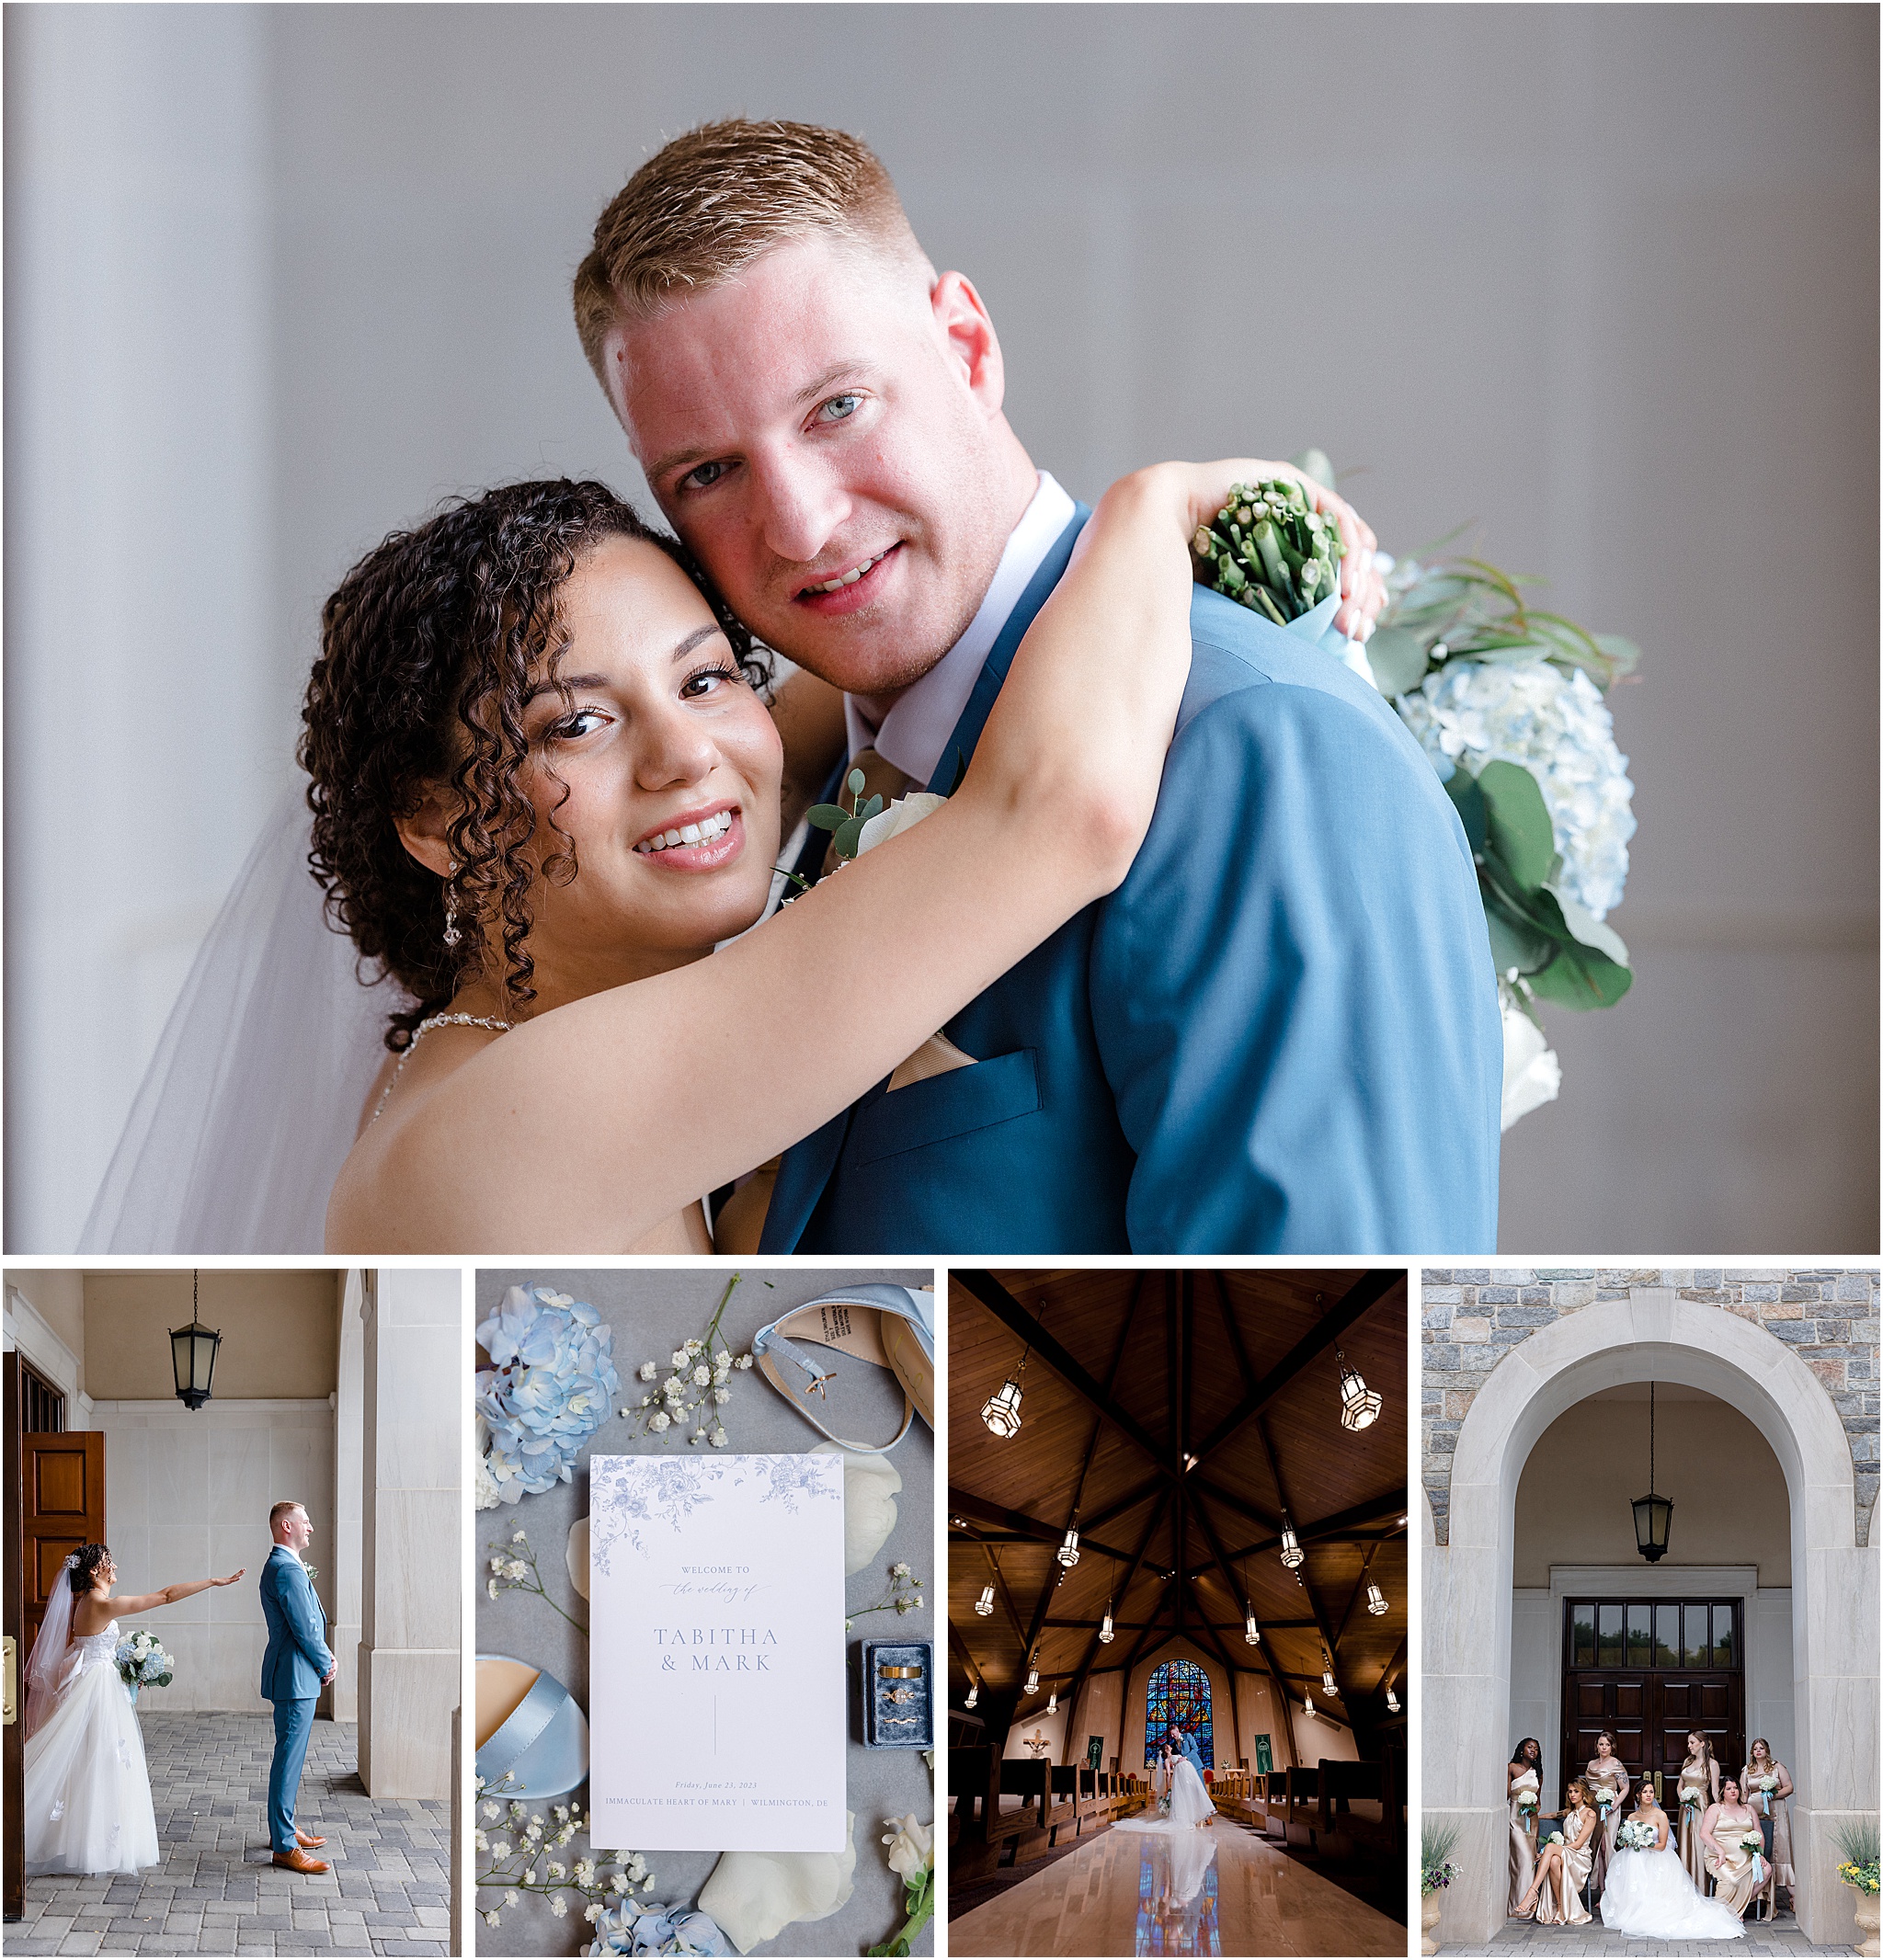 Tabitha + Mark | Wedding at Immaculate Heart of Mary in Wilmington, DE on June 23, 2023 with reception at The Waterfall Banquet in Claymont, DE. Photo by Christopher Ginn Studios